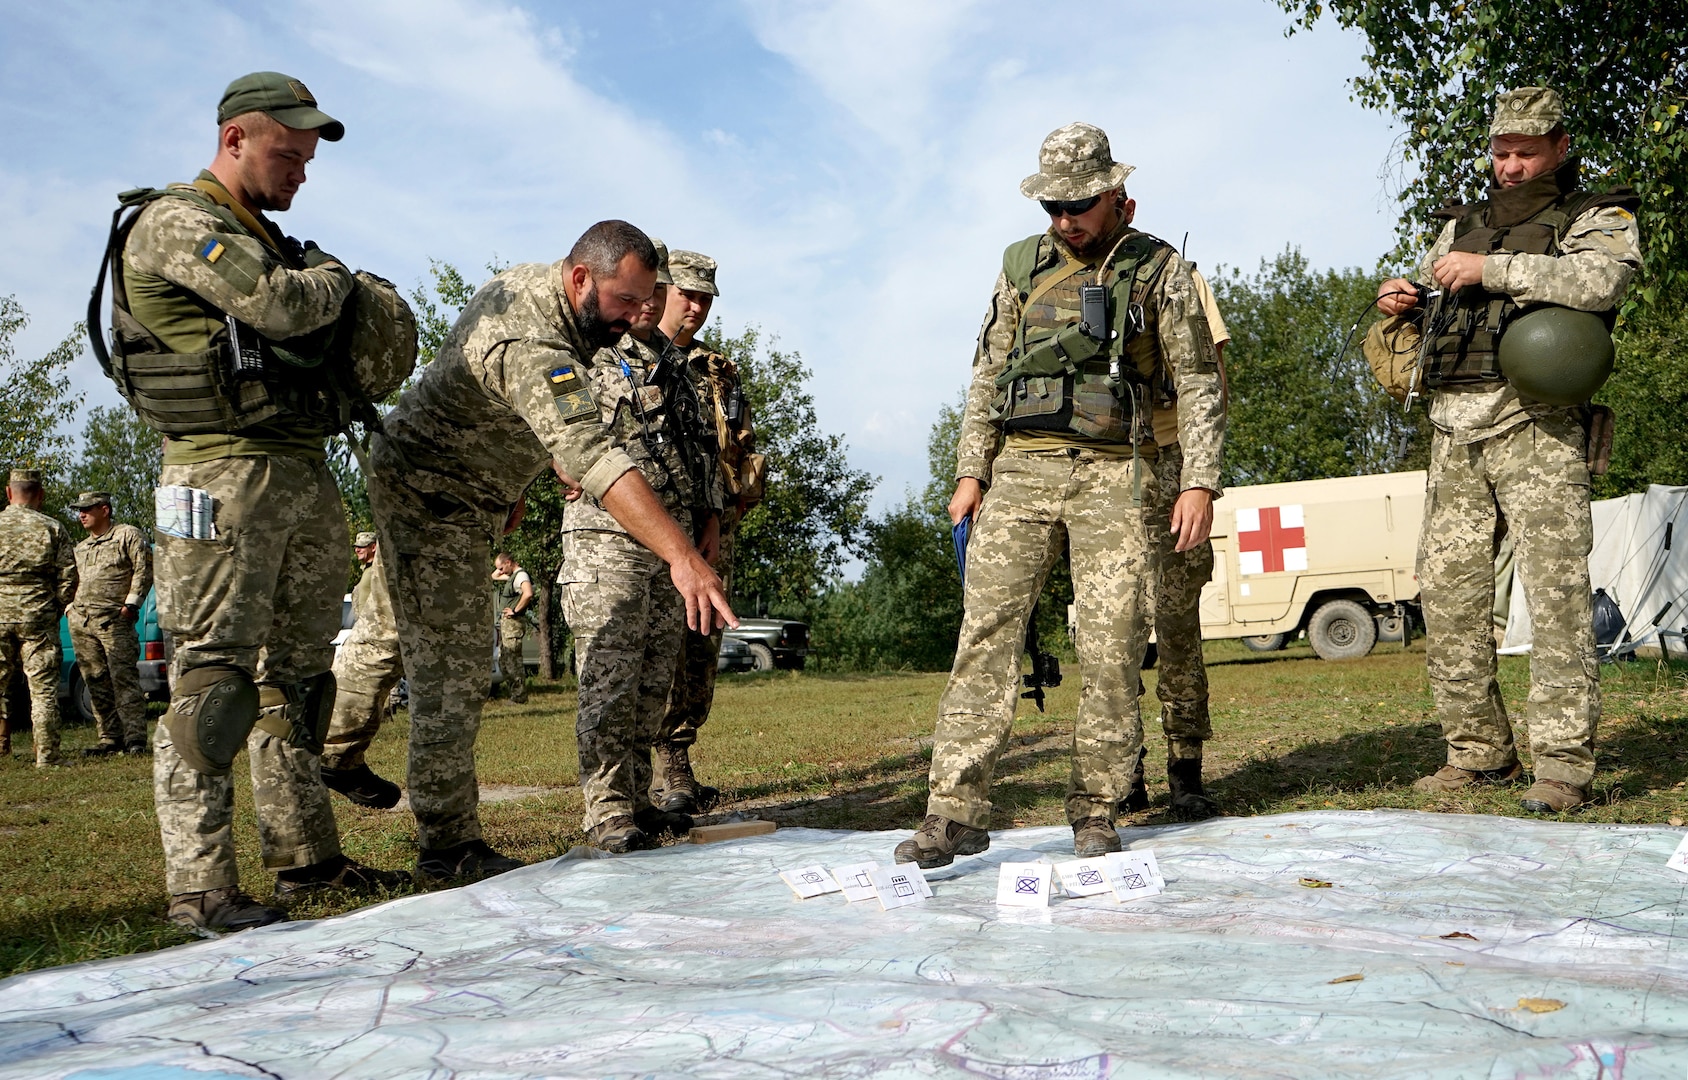 Ukrainian soldiers walk through strategic plans for an exercise during an Operational Capabilities Concept evaluation at the International Peacekeeping and Security Centre in Yavoriv, Ukraine, Sept. 11, 2018.